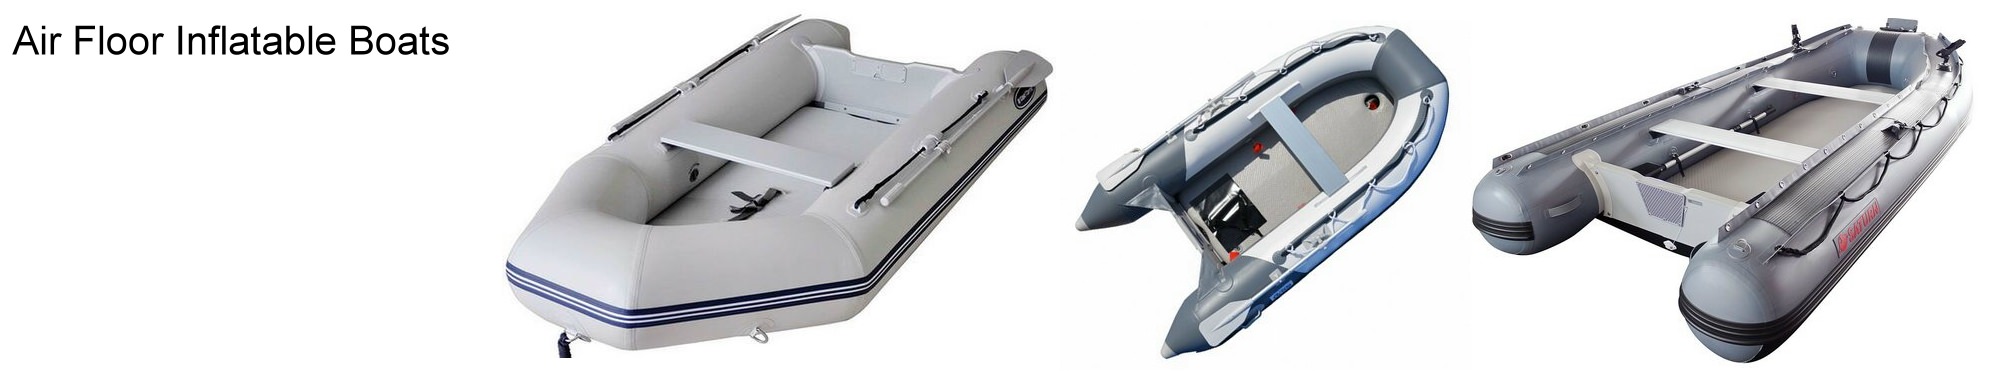 air floor inflatable boats